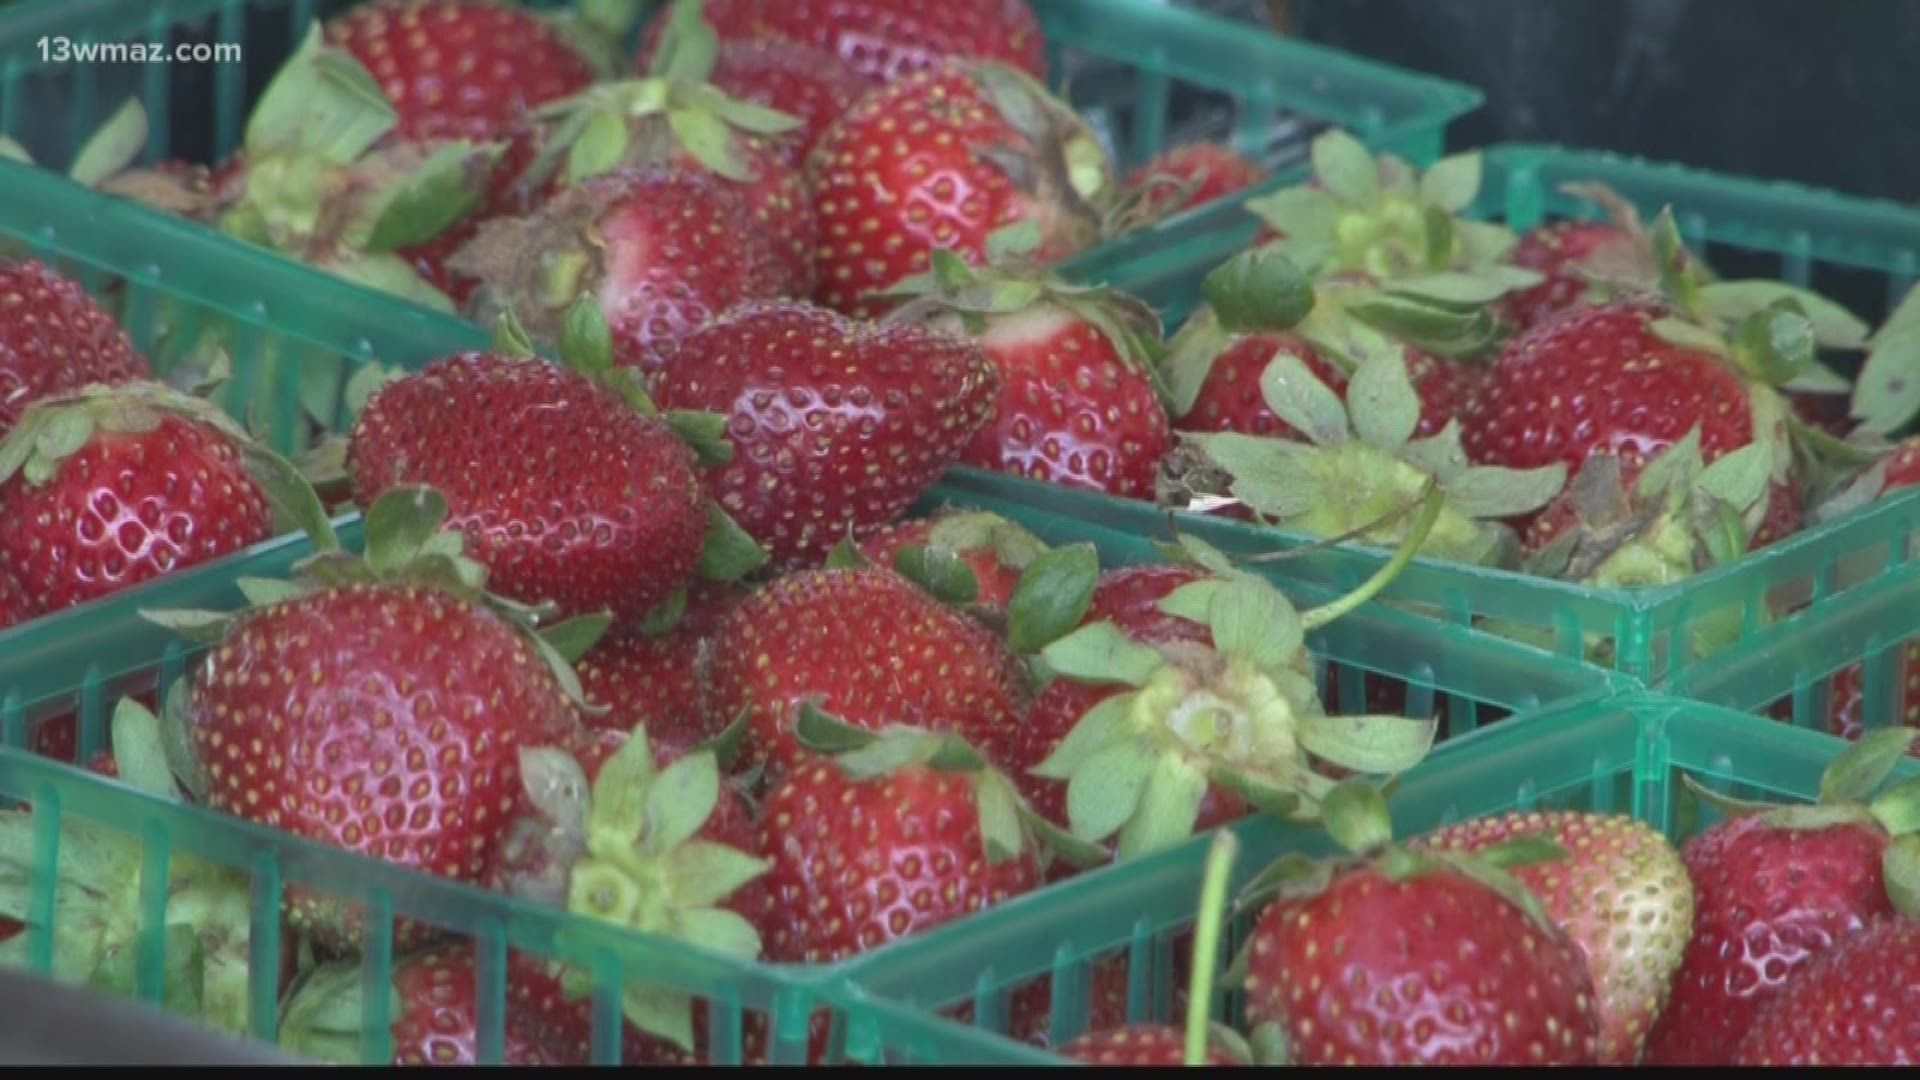 A Twiggs County farmer wants to help get fresh produce to some people who may not be able to afford it. Farmer Julia Asherman says her goal is to give everyone access to fresh fruits and veggies. People who use food stamps like EBT can now catch a deal on her produce.